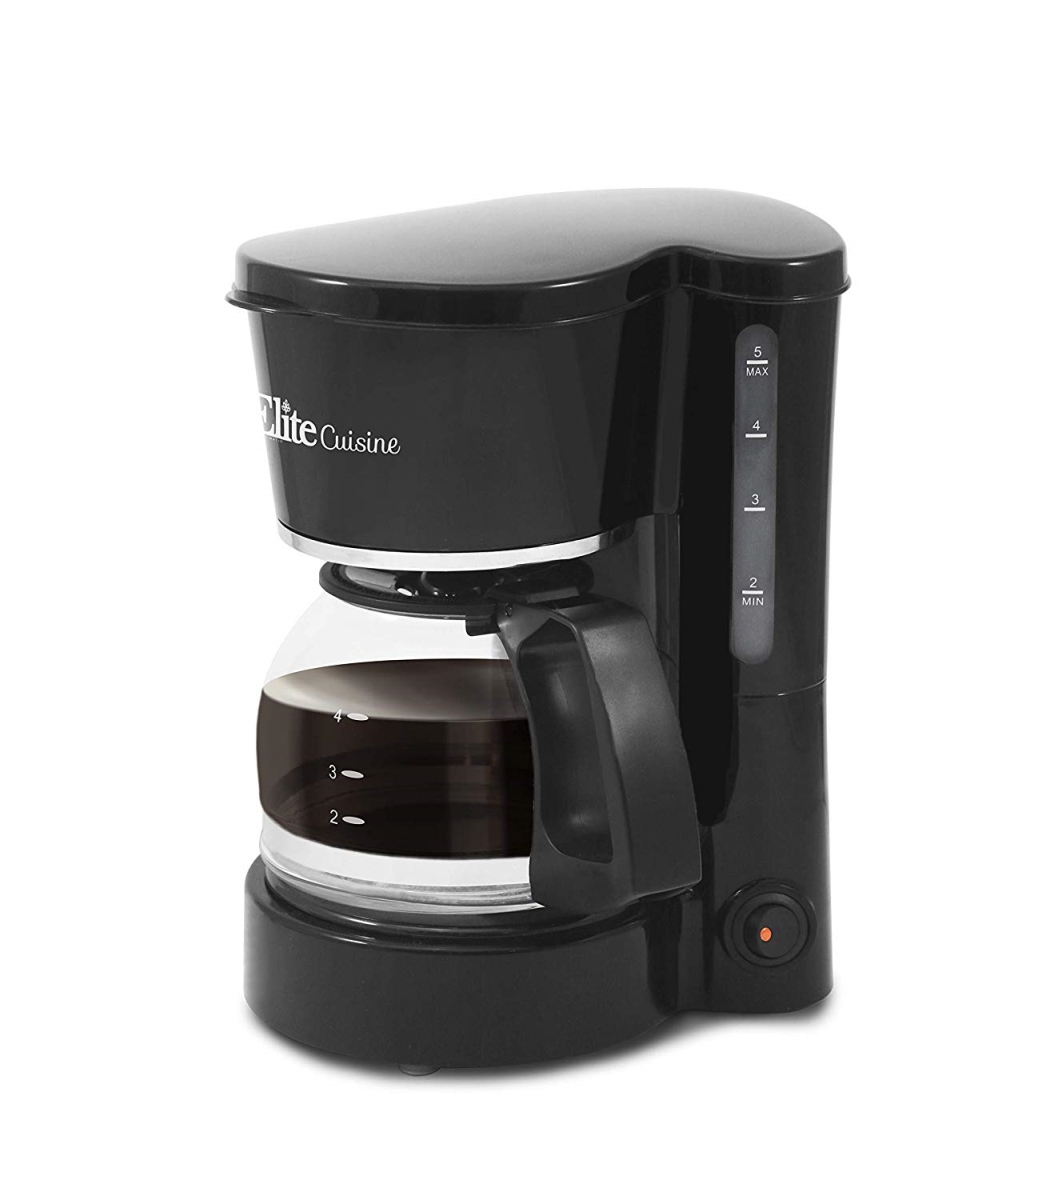 Picture of Maximatic EHC-5055 Elite Cuisine 5 Cup Coffee Maker with Pause & Serve - Black